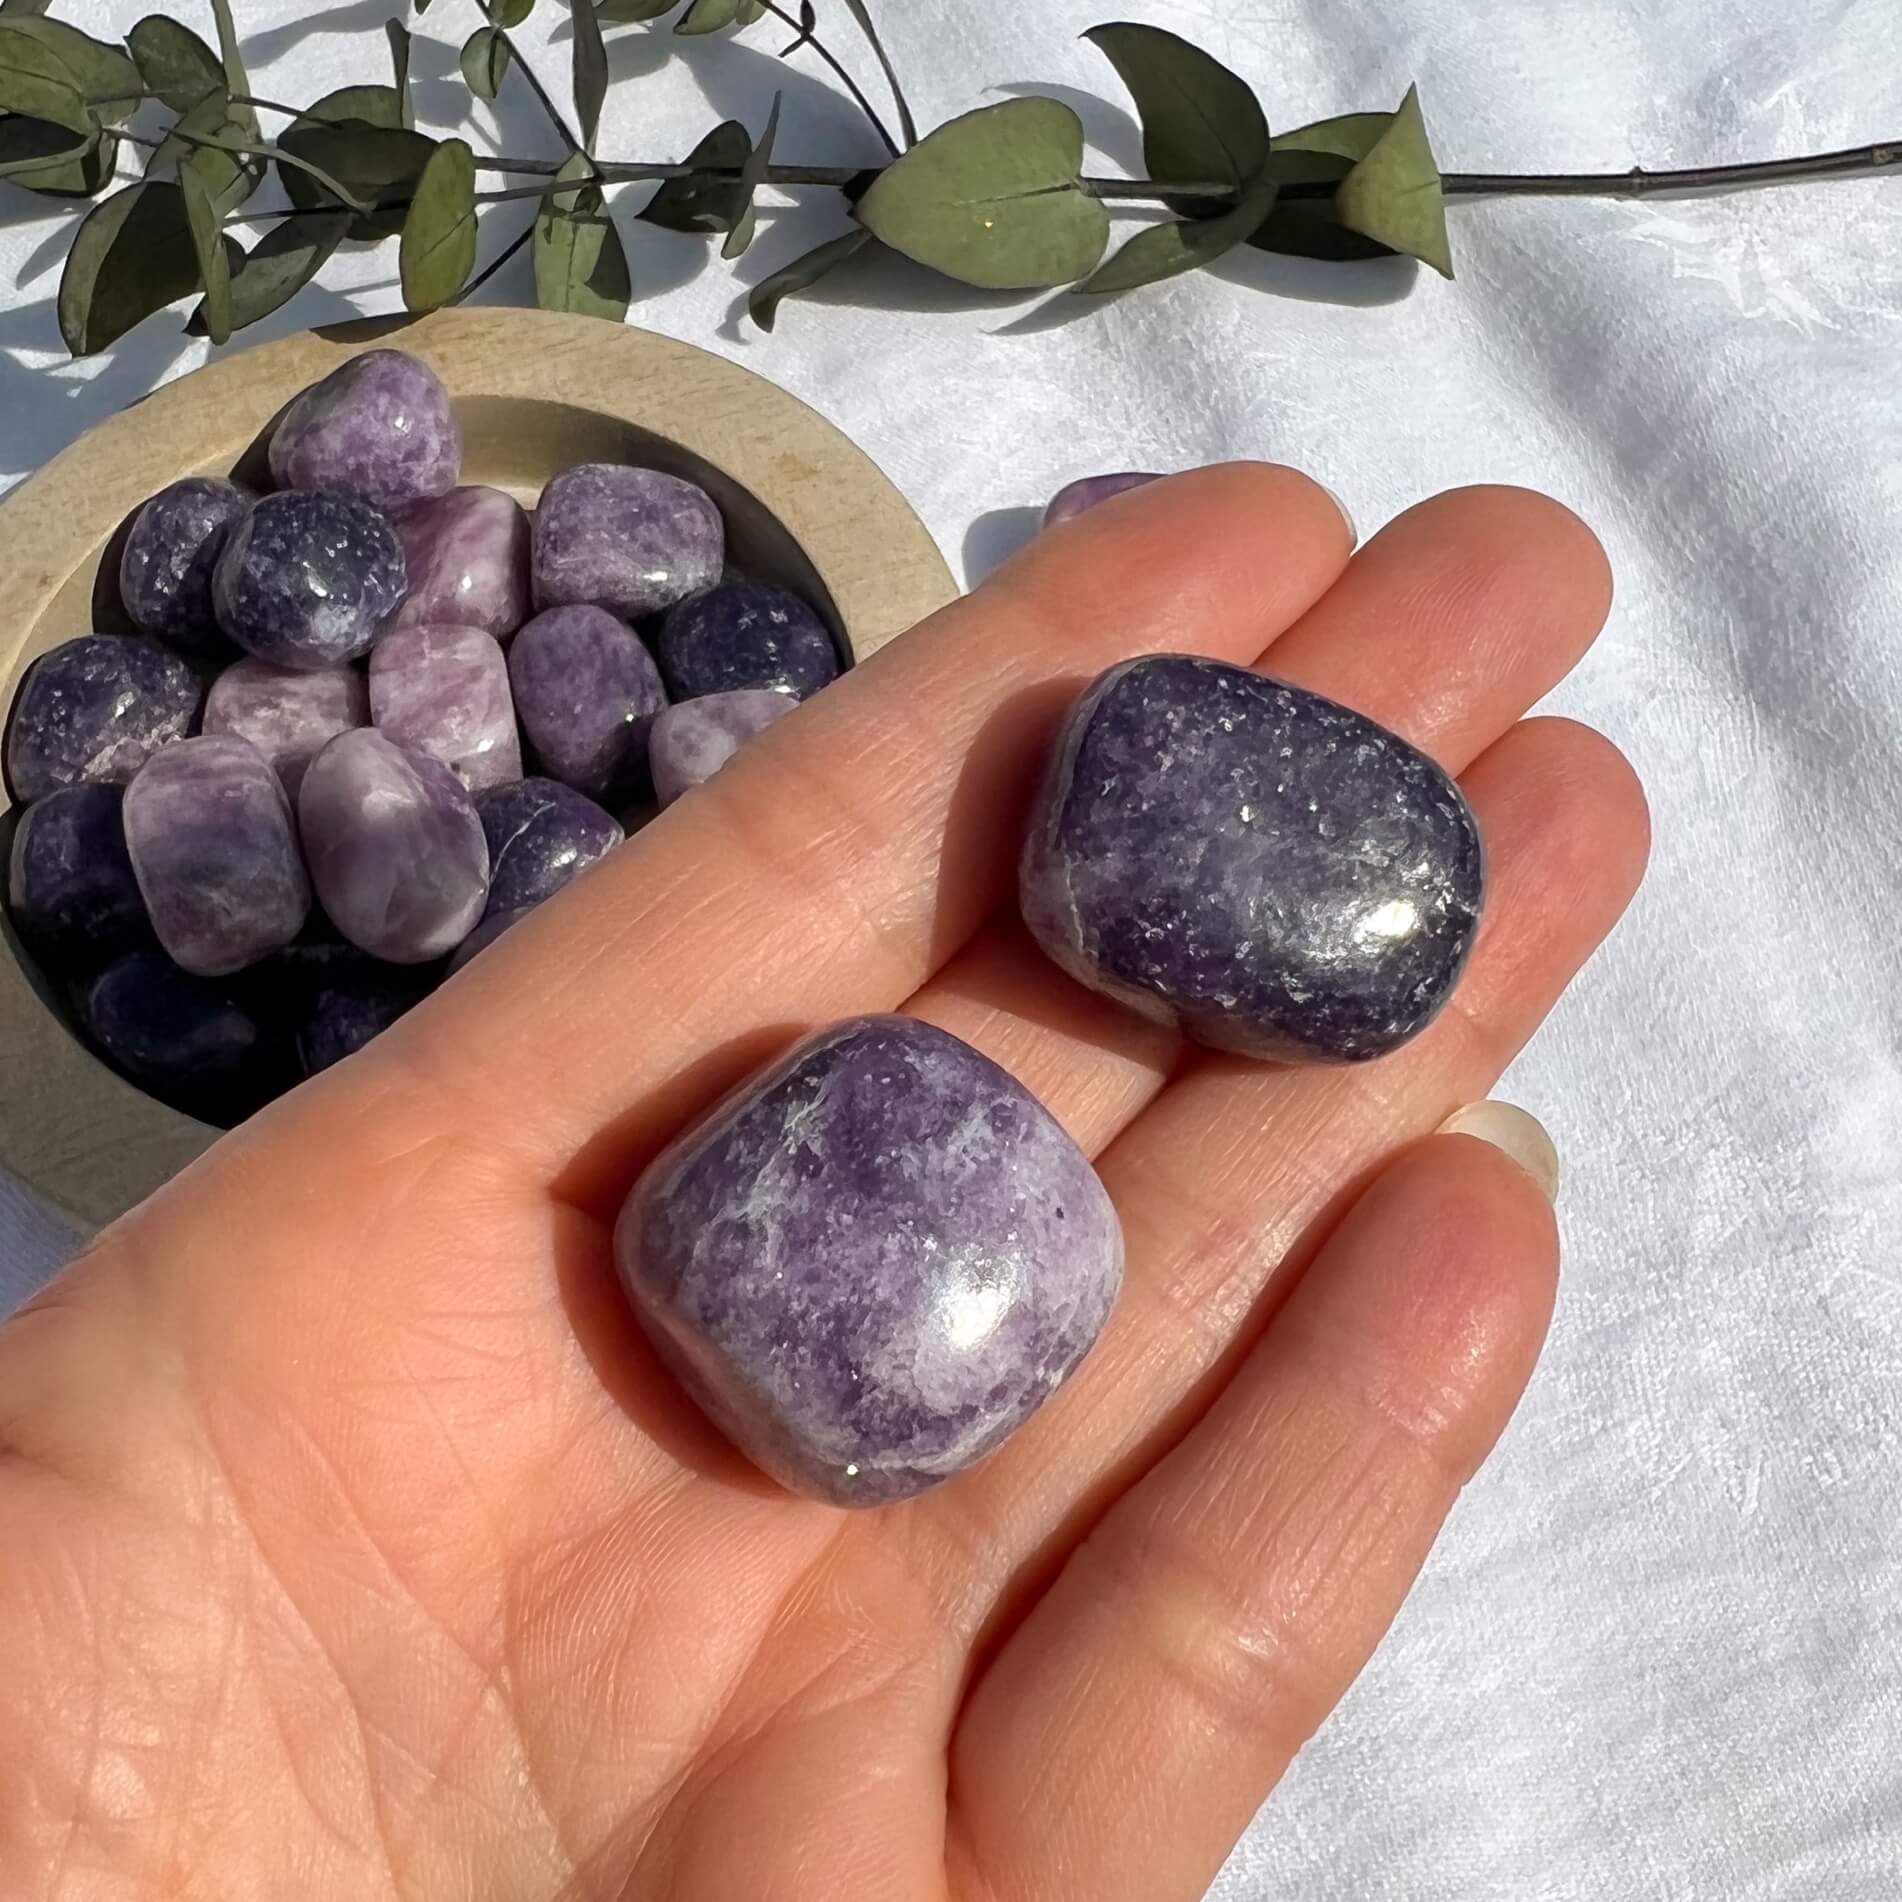 Dark and pale purple and white patterned lepidolite crystal tumblestones in an outstretched hand